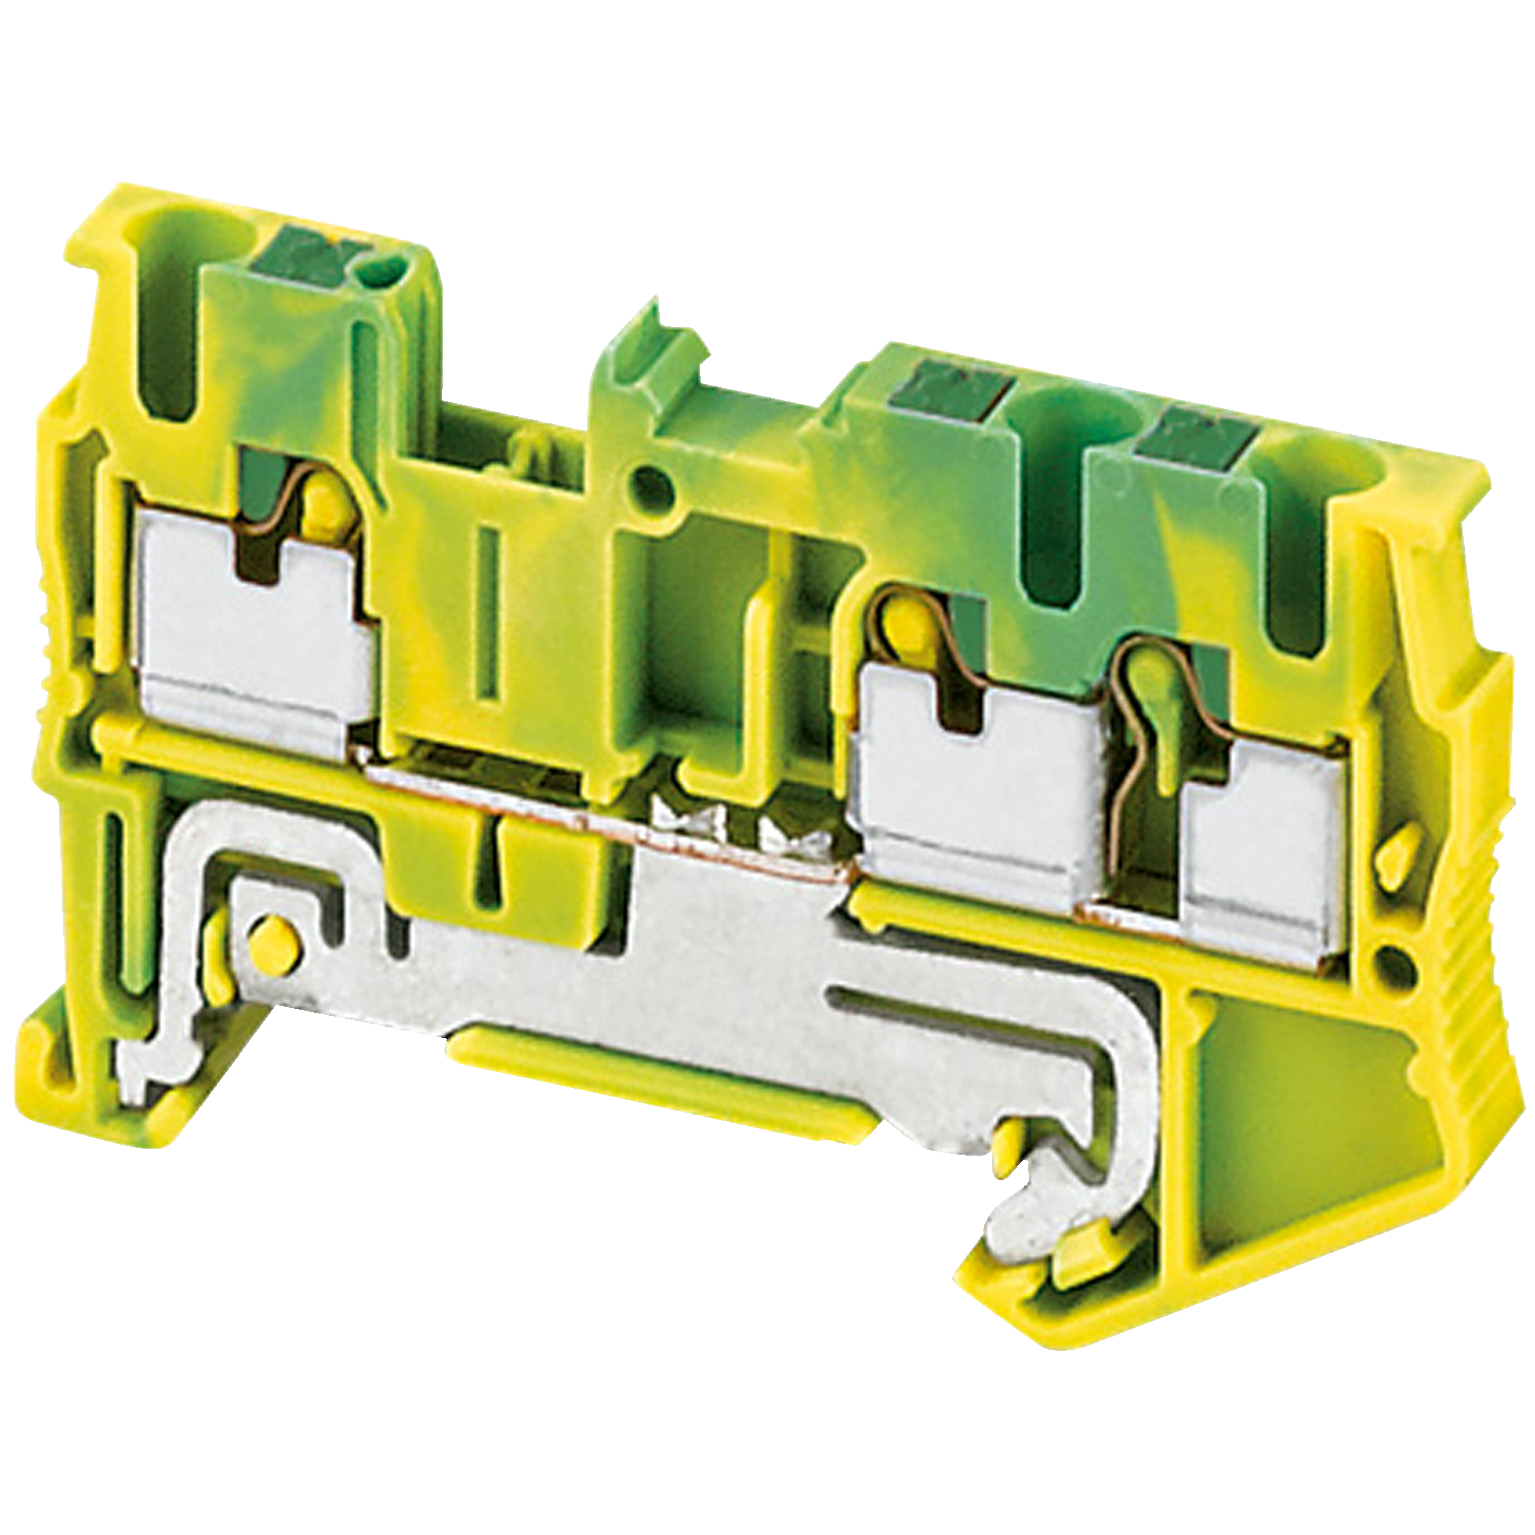 Terminal block, Linergy TR, push-in type, 3 points, 2.5mm², protective earth, green-yellow, set of 50